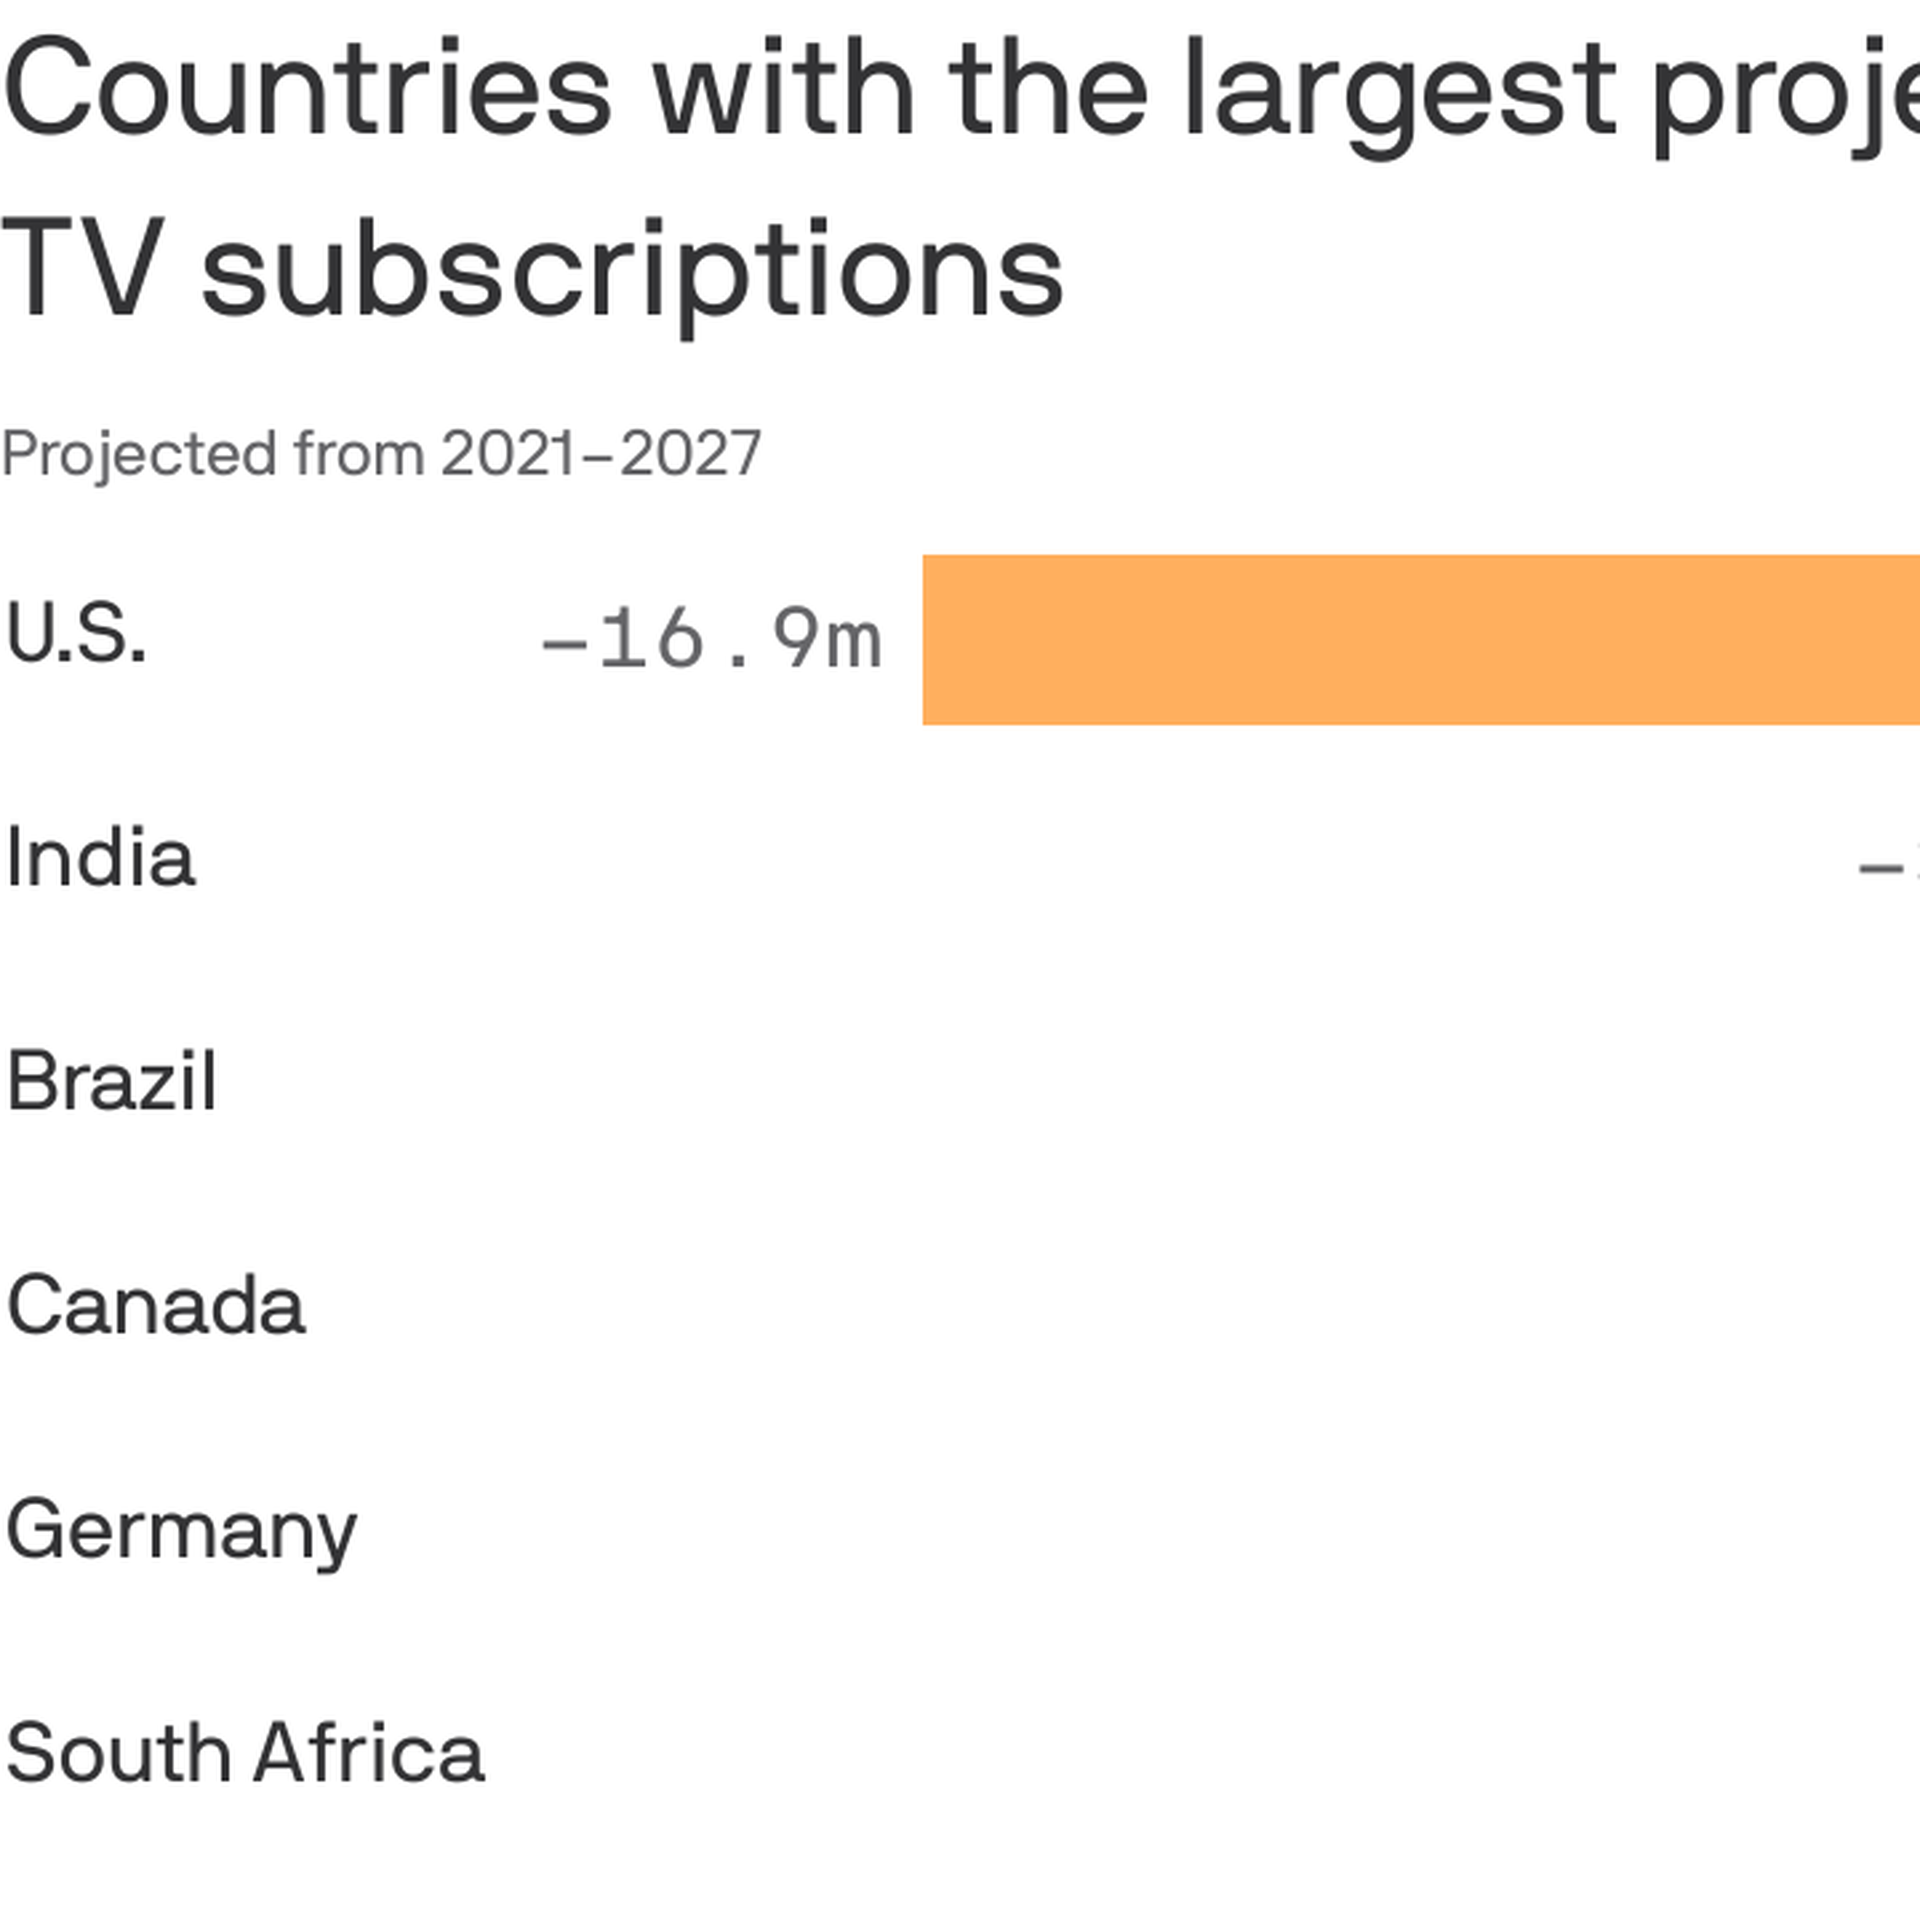 Countries with the largest projected changes in pay-TV subscriptions